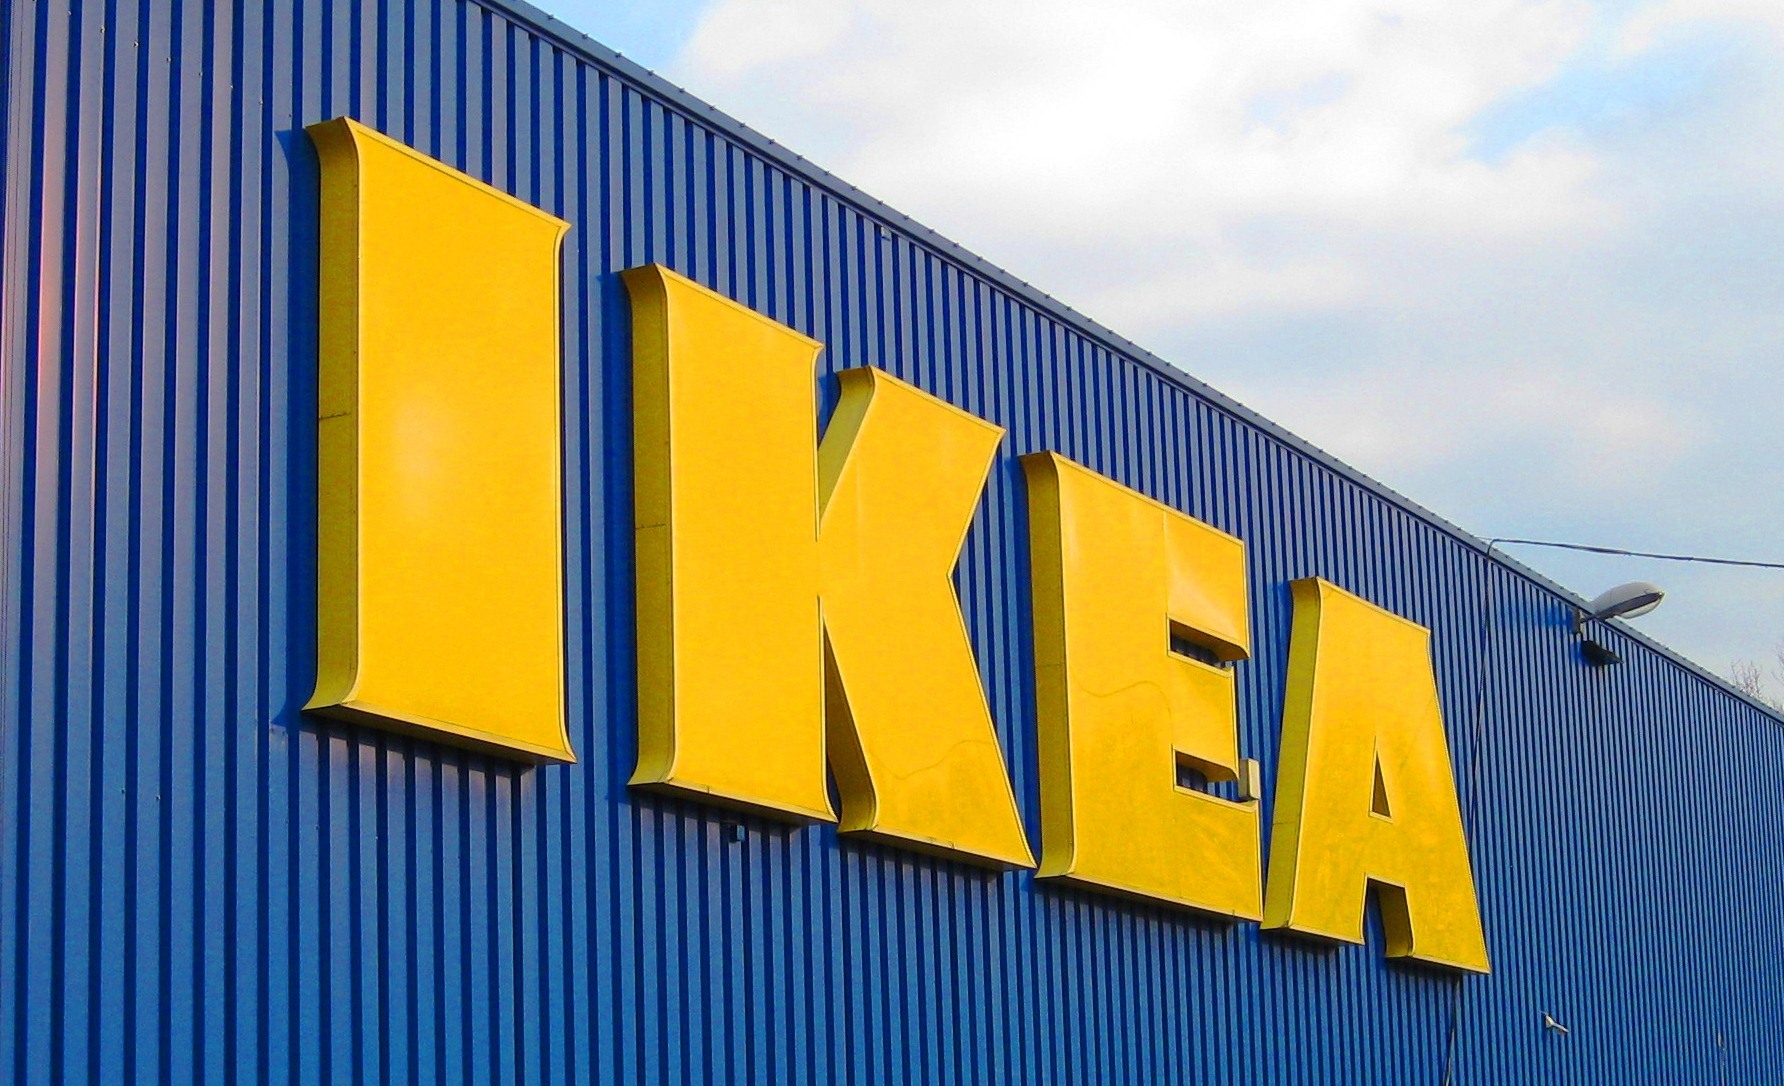 IKEA to open new distribution centre in Richmond; double retail stores by  2025 - Richmond News